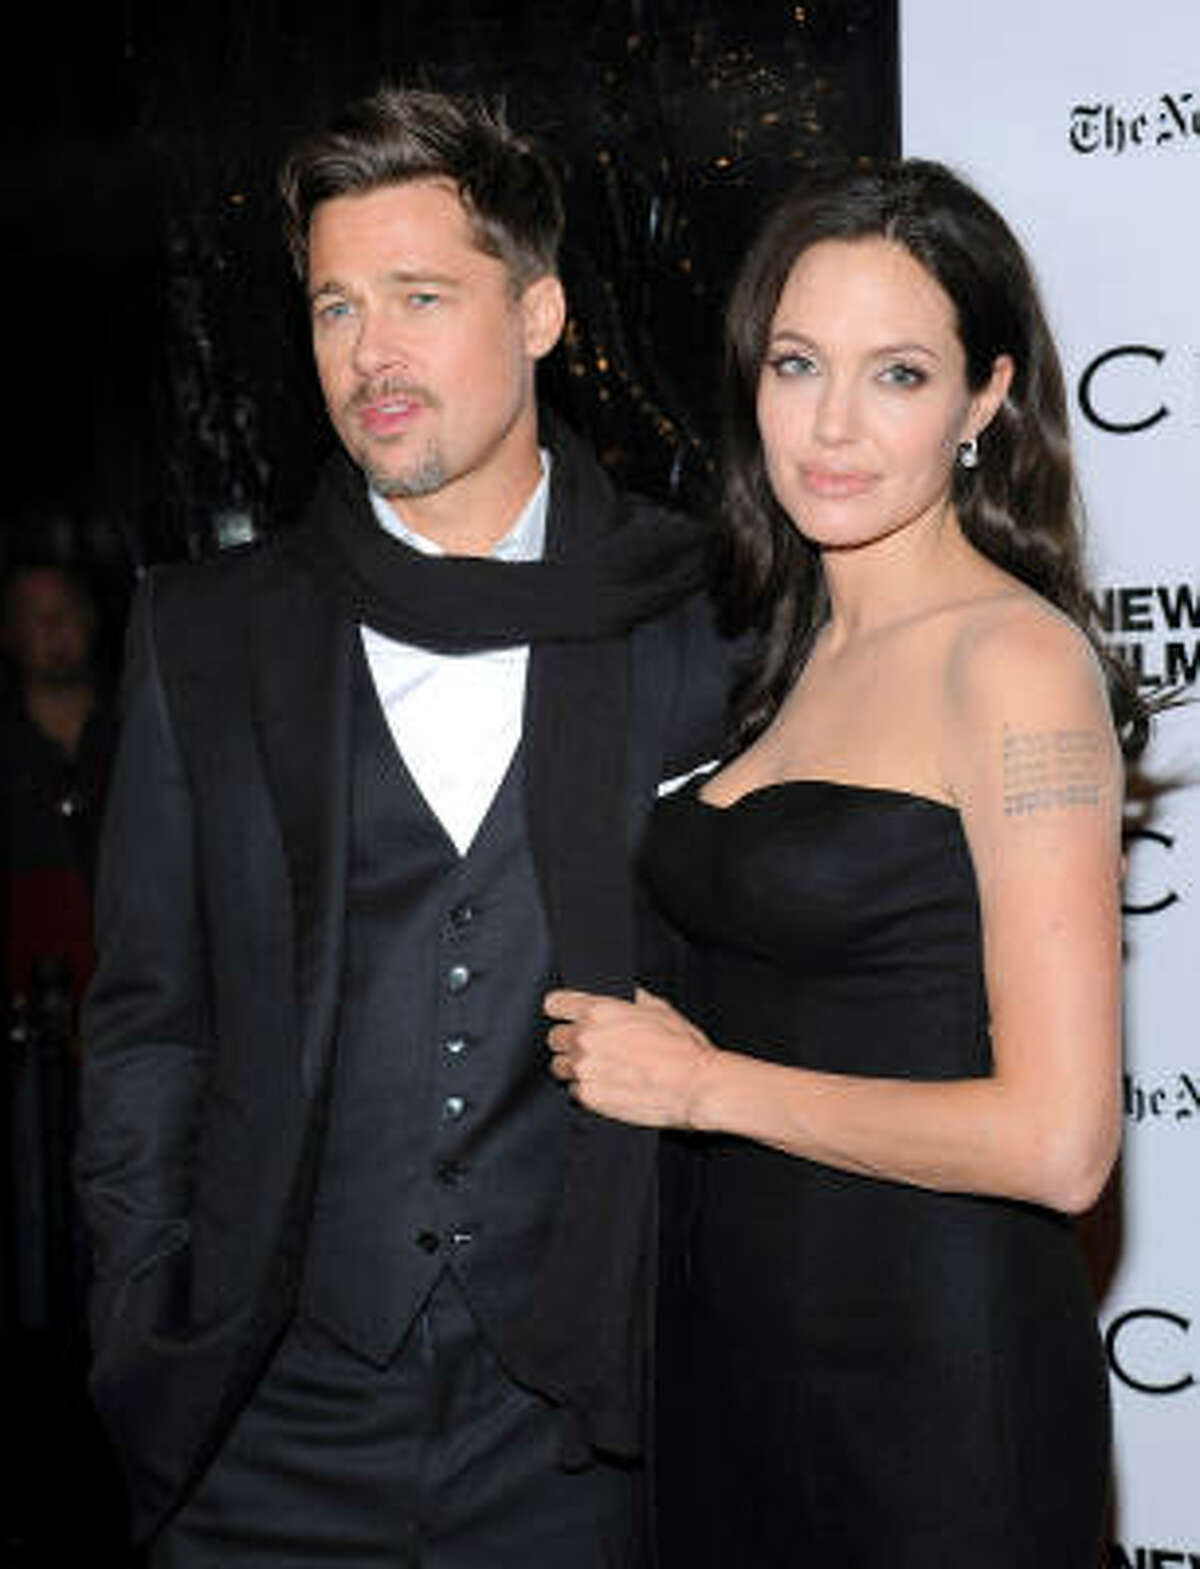 Three months after giving birth to twins, Angelina Jolie told Matt Lauer that she's ready to adopt another child.